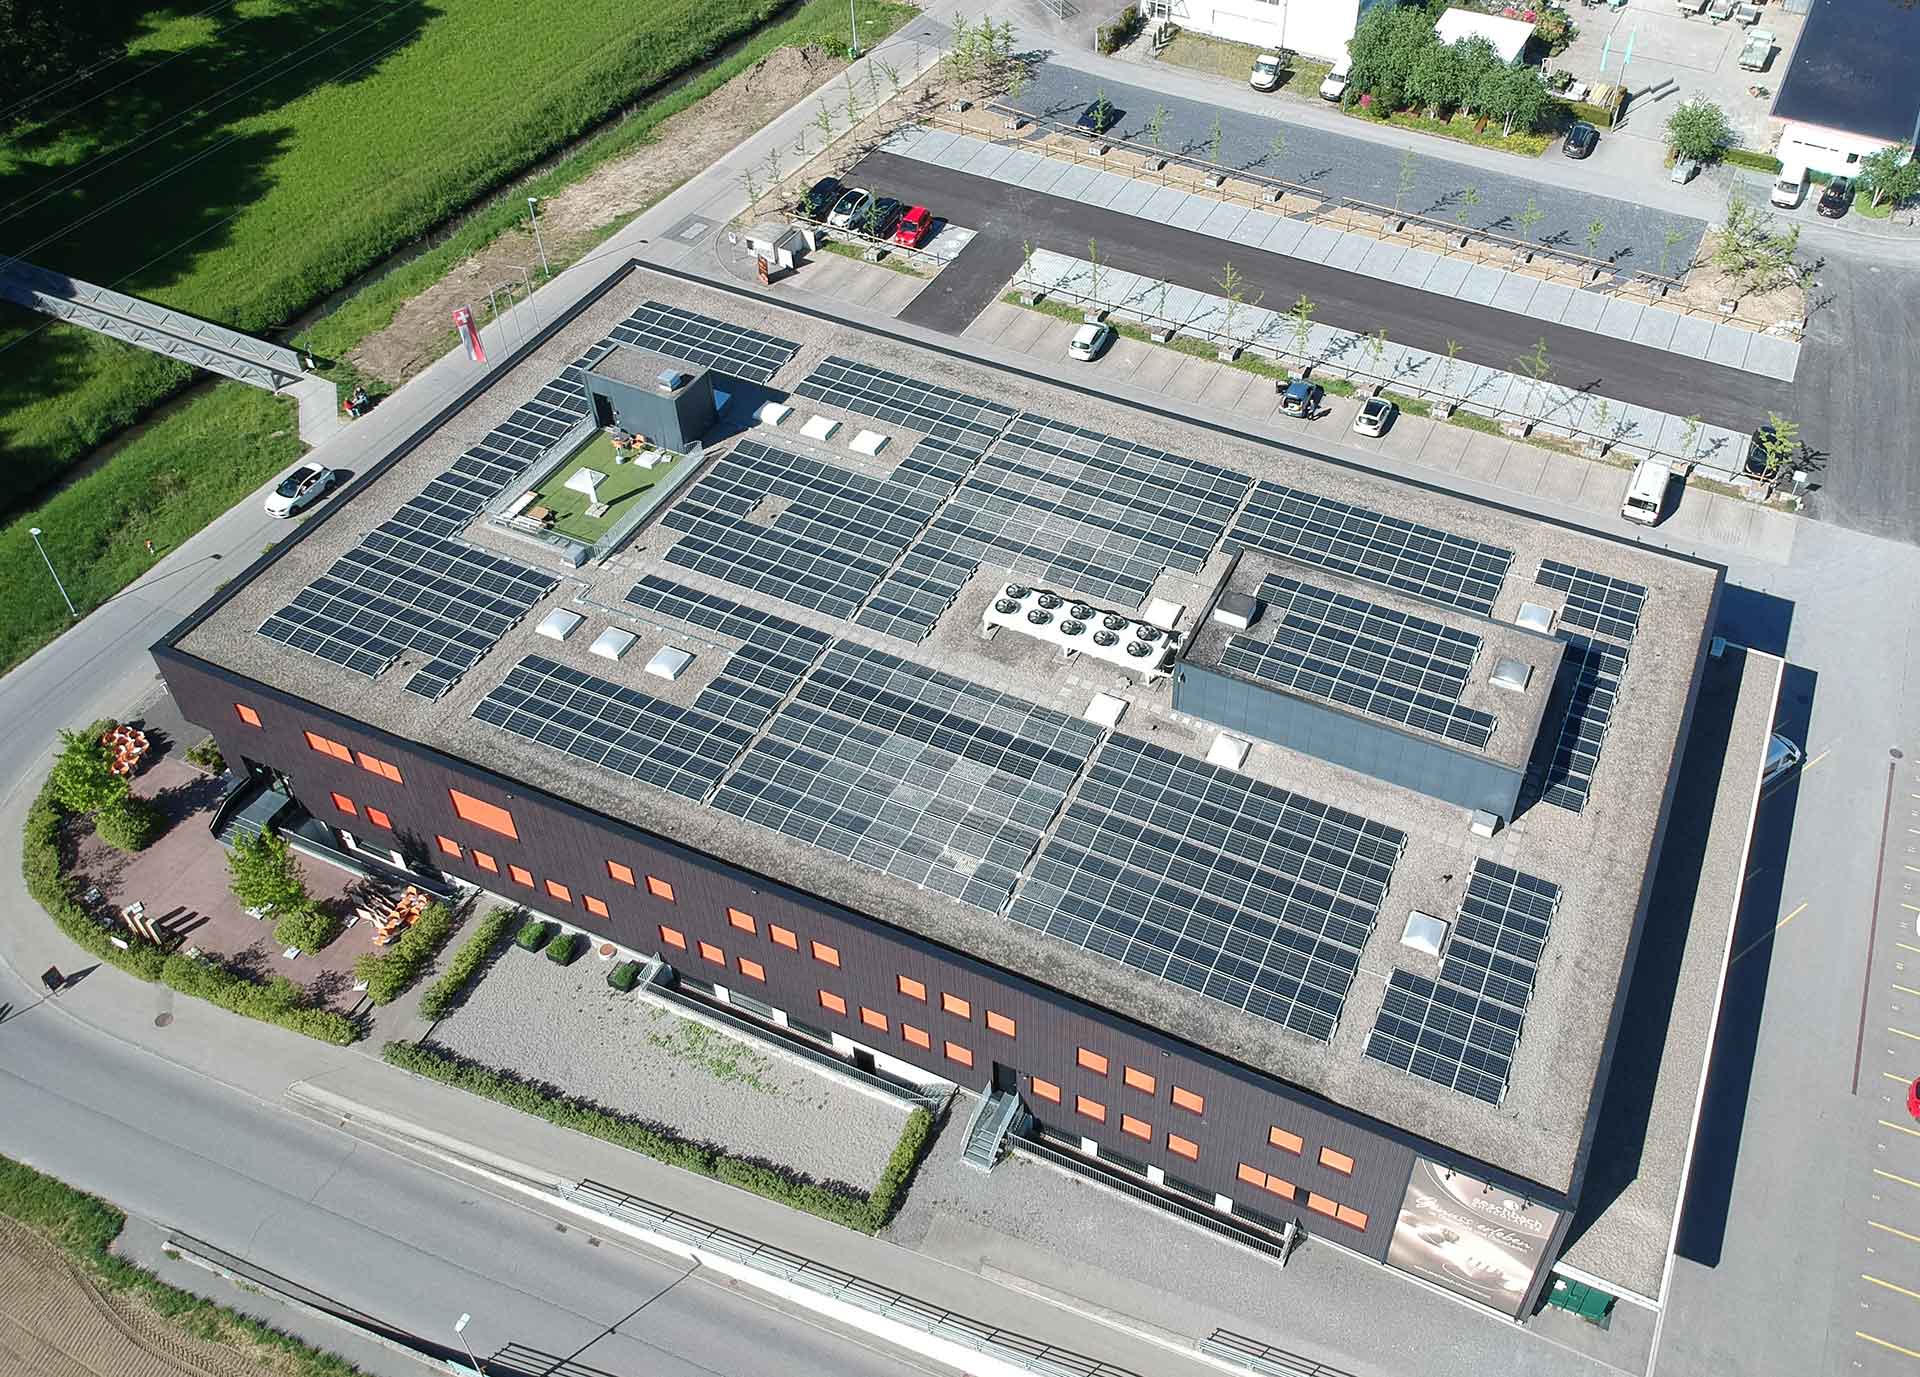 Solar roof installation at Aeschbach headquarters